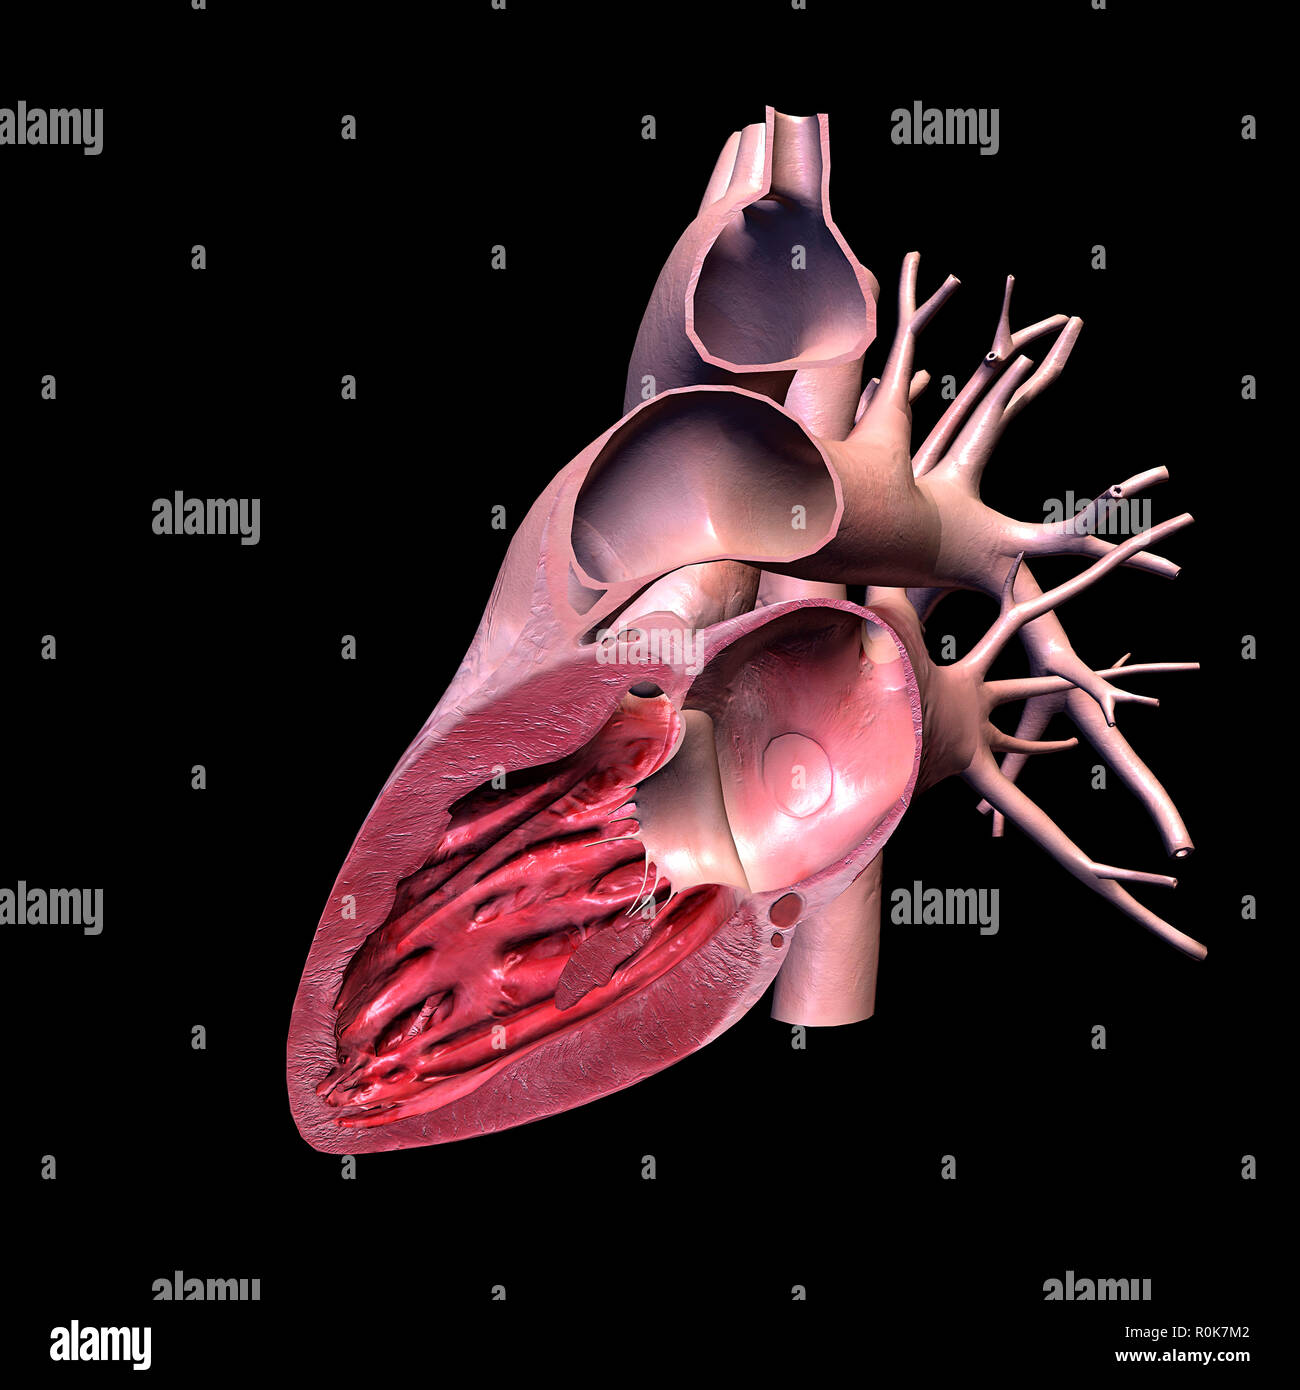 Lateral cut view of human heart on black background. Stock Photo